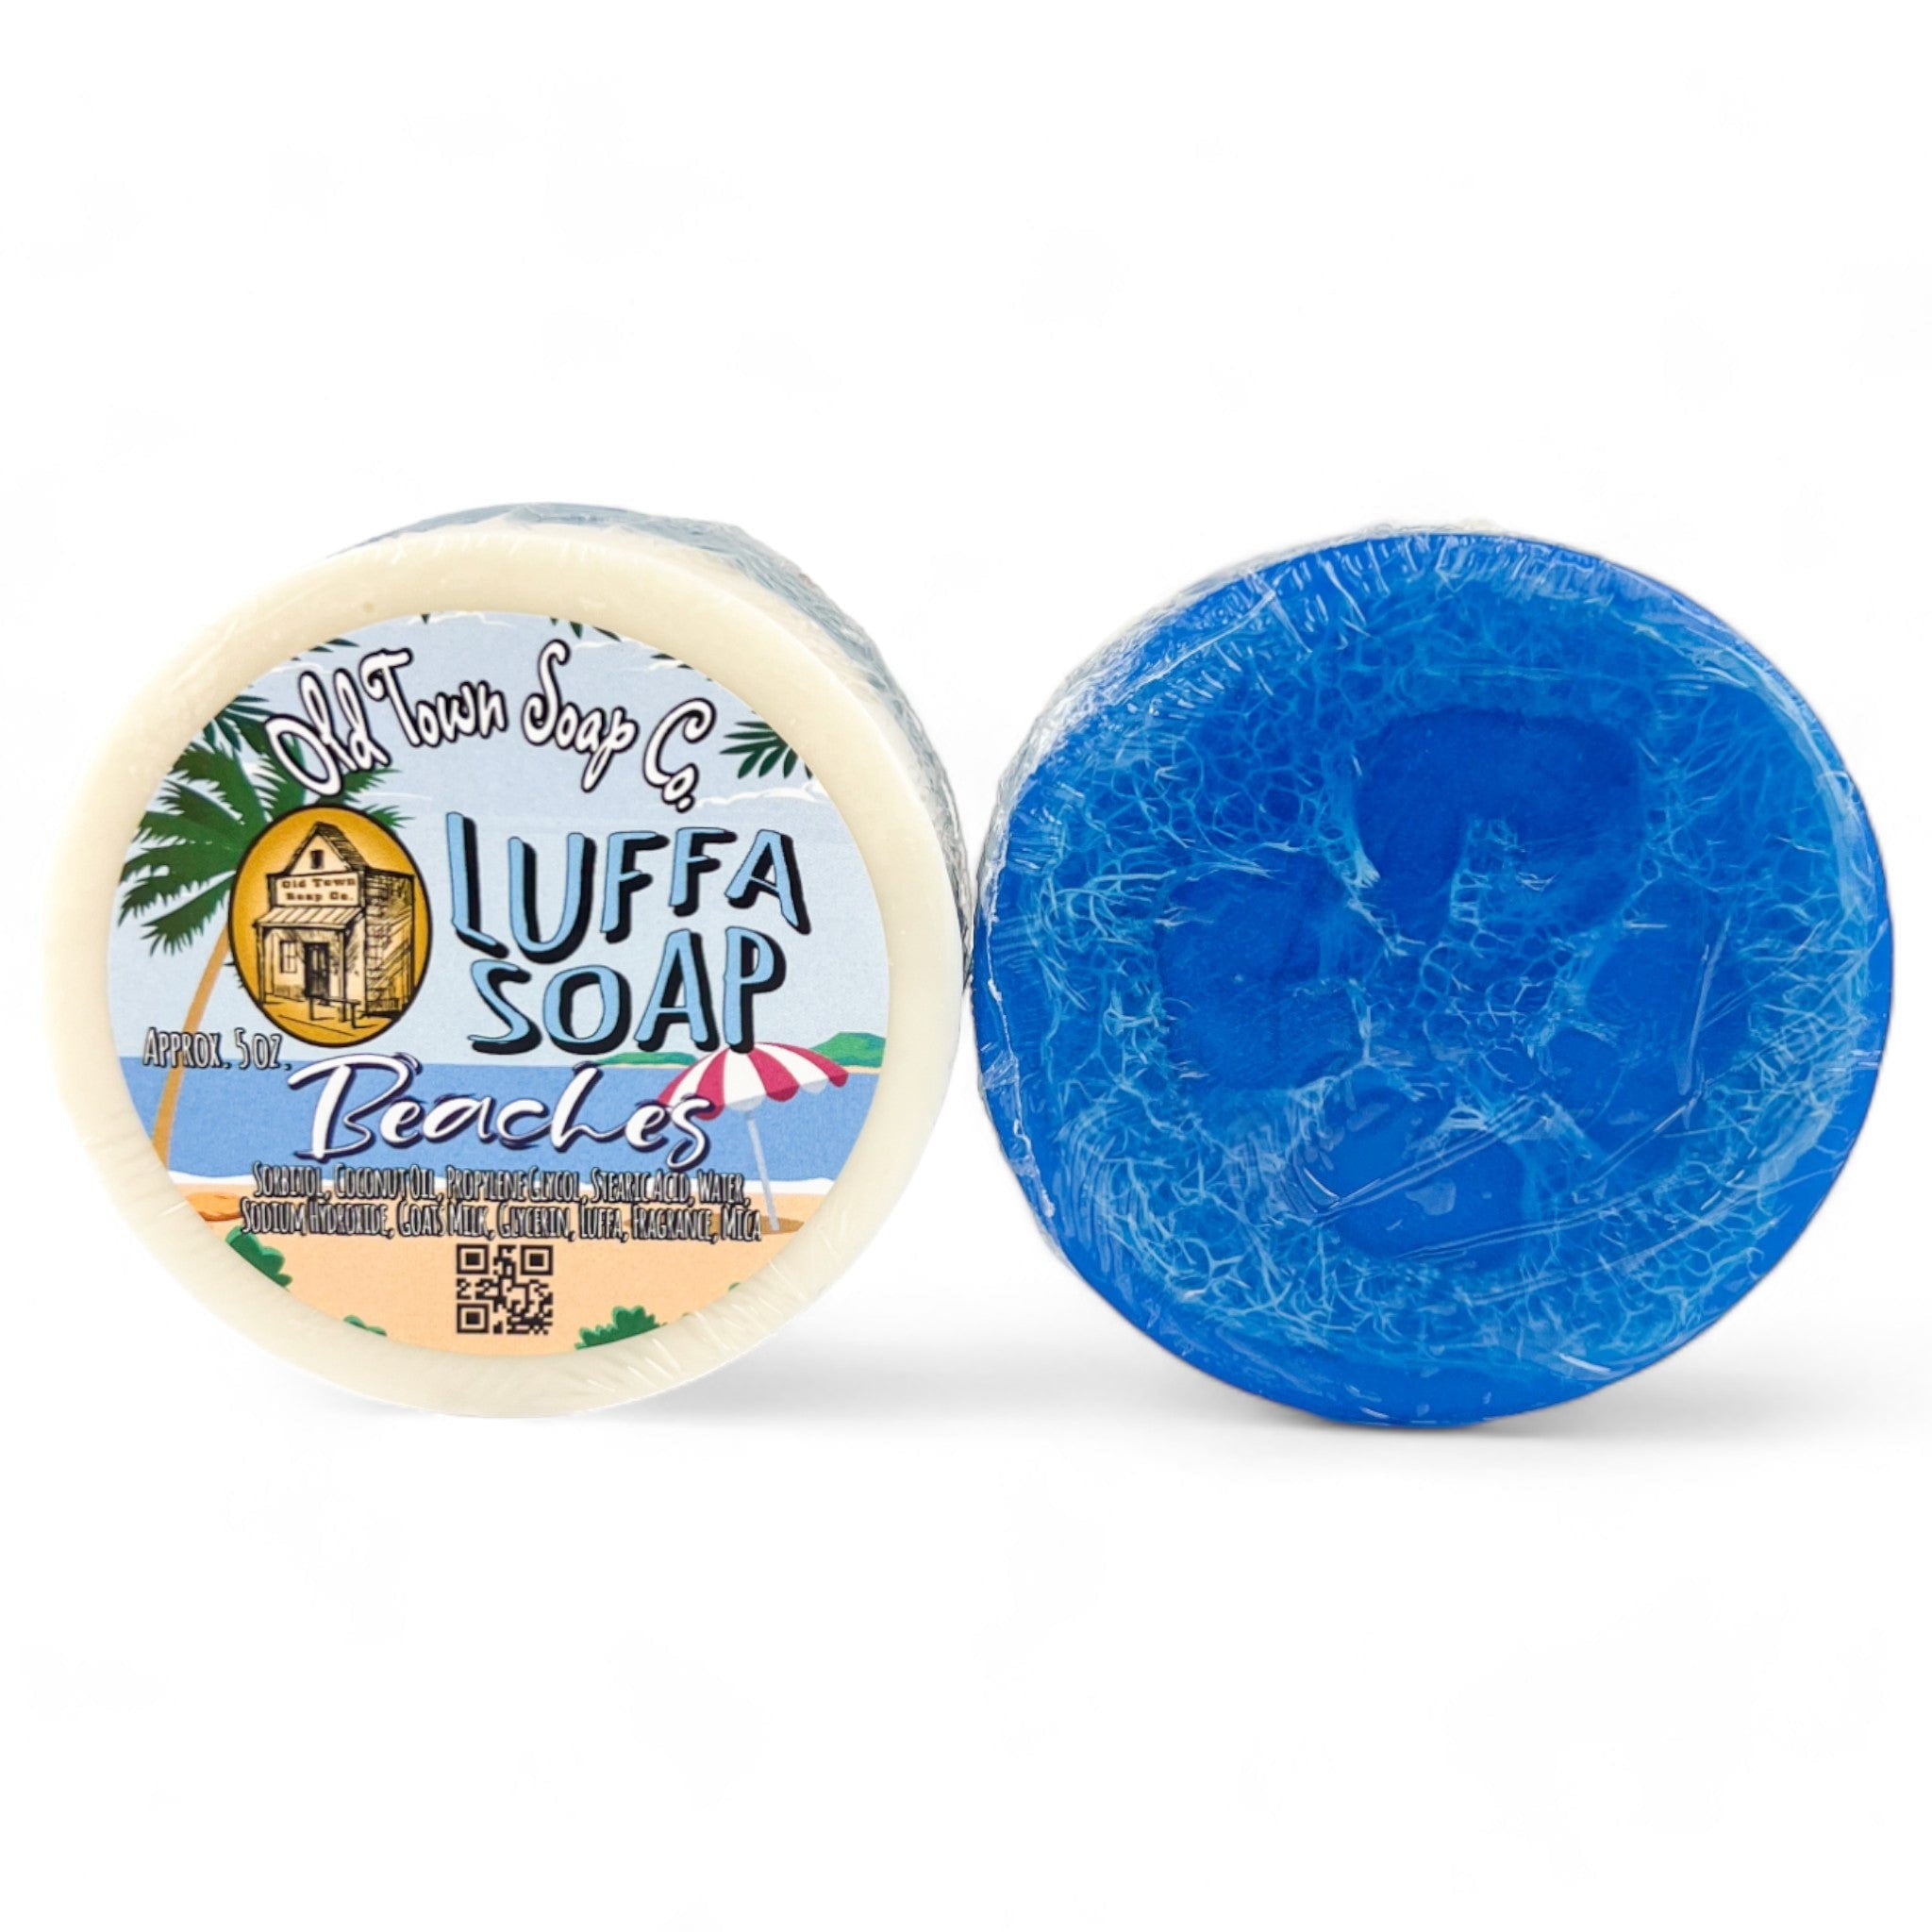 Beaches -Luffa Soap - Old Town Soap Co.